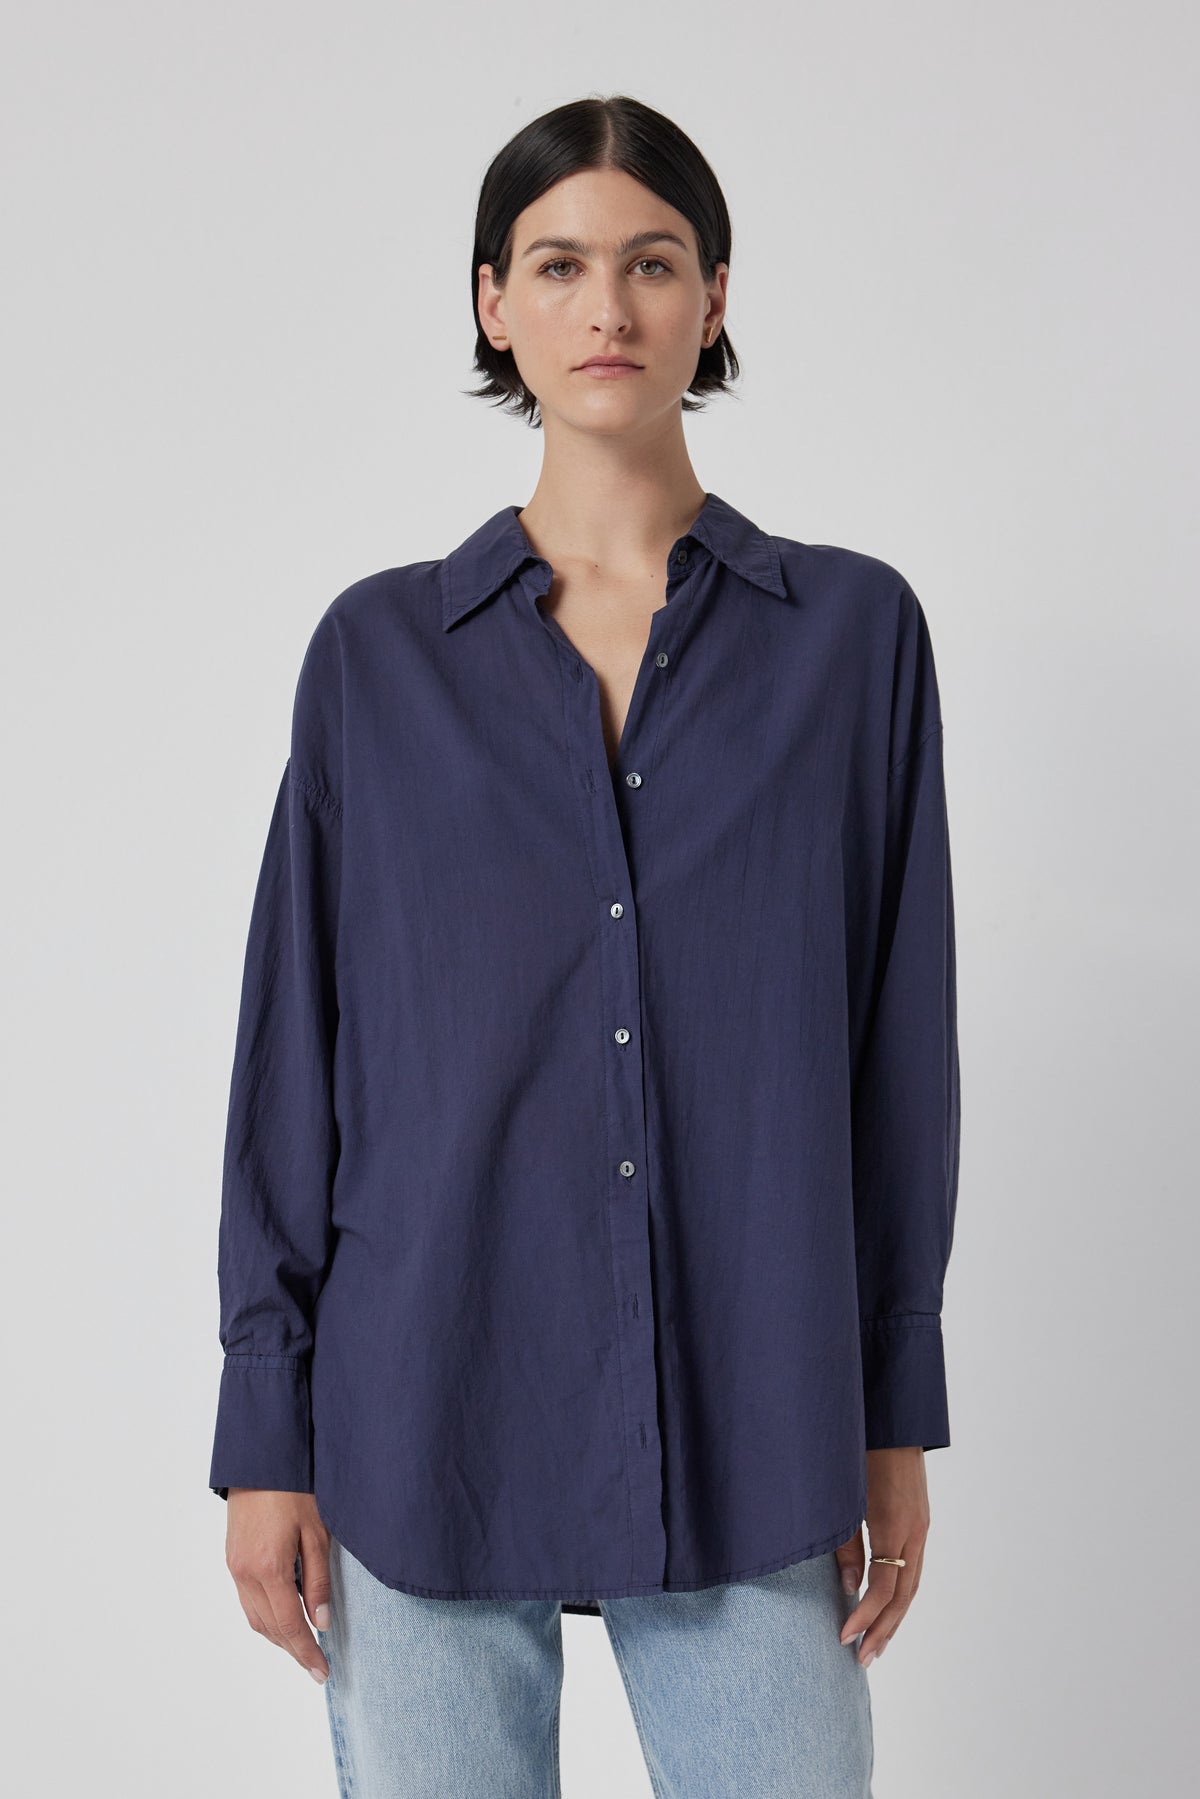 Woman wearing an oversized navy blue REDONDO BUTTON-UP SHIRT by Velvet by Jenny Graham and light blue jeans against a white background.-36168814624961